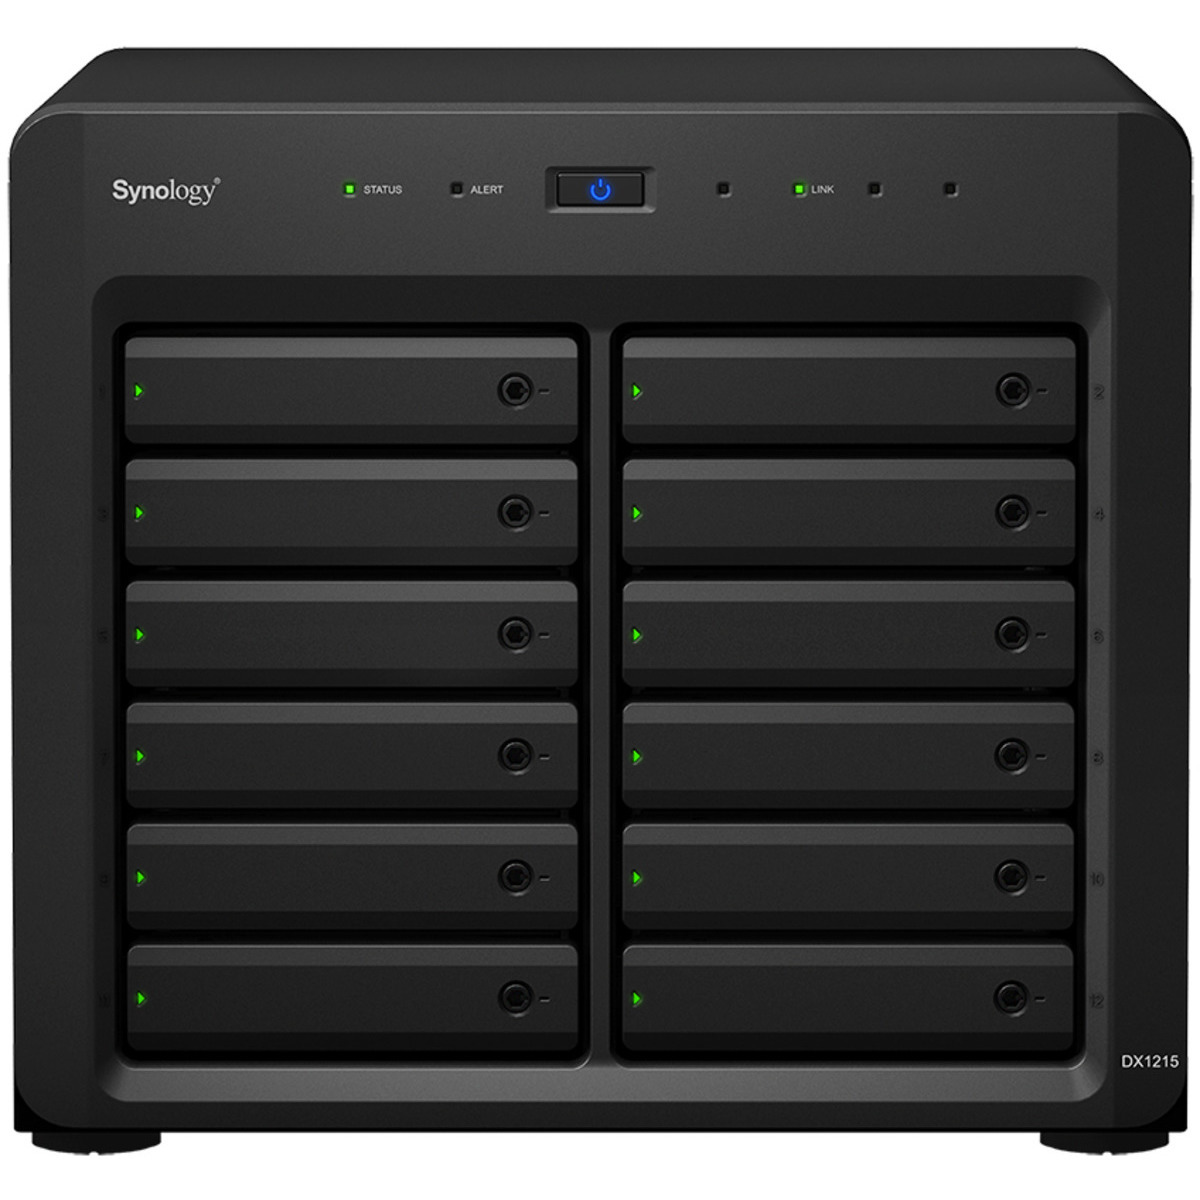 Synology DX1215II External Expansion Drive 180tb 12-Bay Desktop Multimedia / Power User / Business Expansion Enclosure 10x18tb Seagate IronWolf Pro ST18000NT001 3.5 7200rpm SATA 6Gb/s HDD NAS Class Drives Installed - Burn-In Tested DX1215II External Expansion Drive